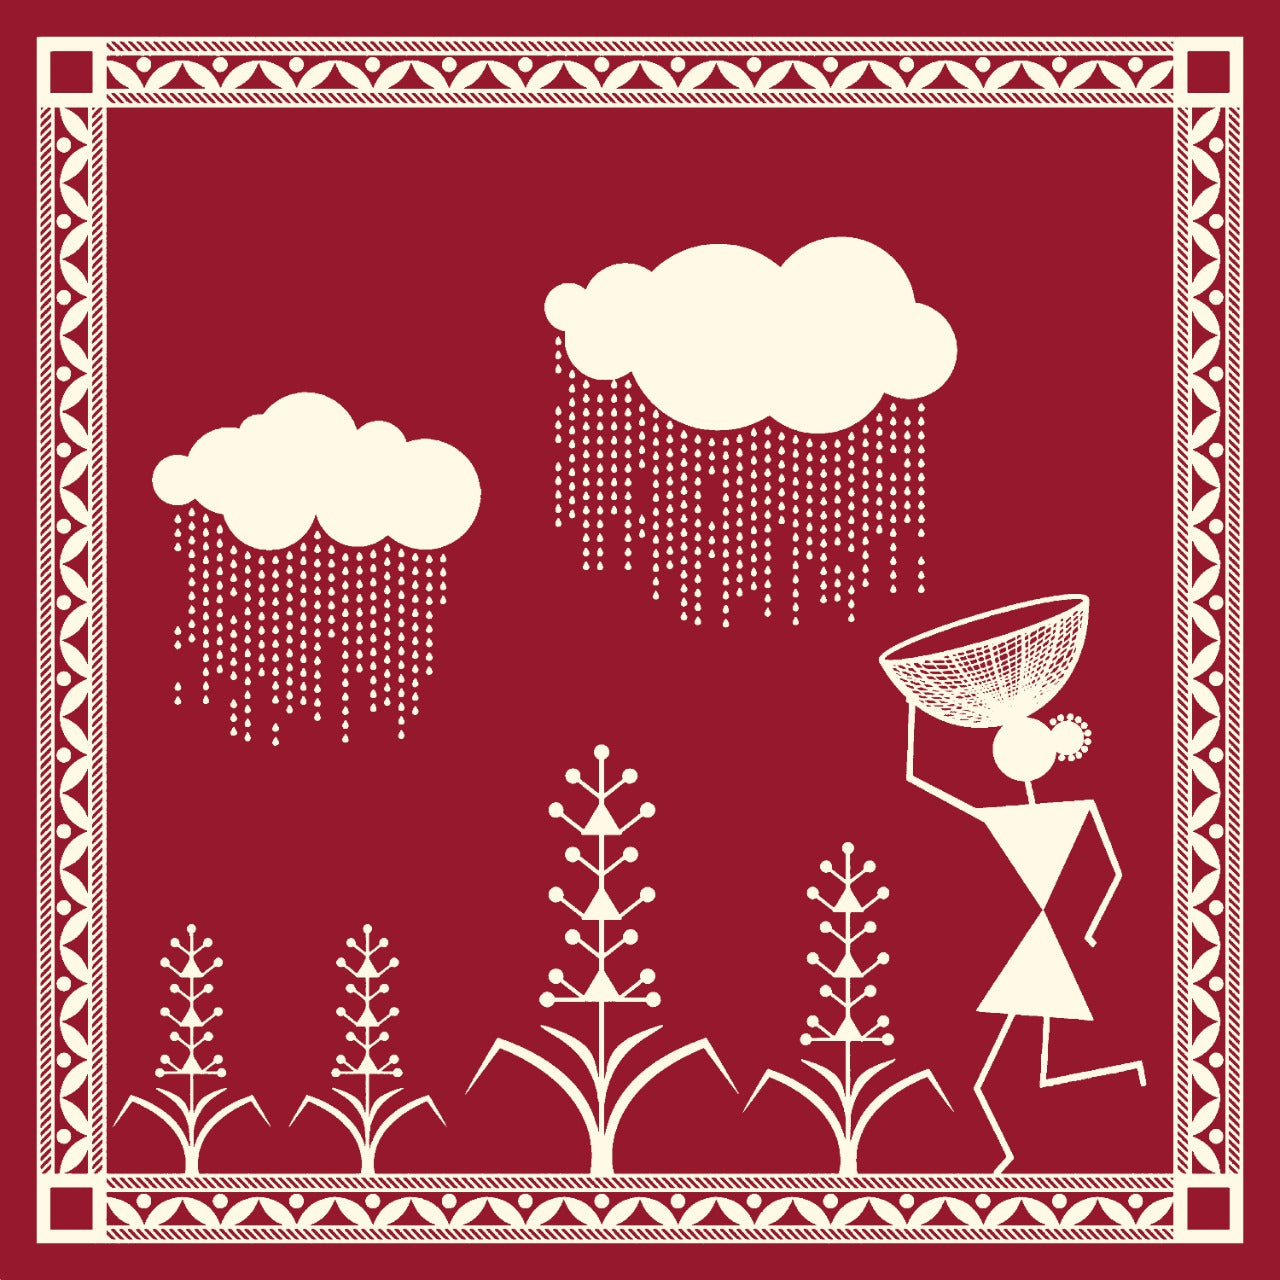 A Warli backdrop with red and white hues.